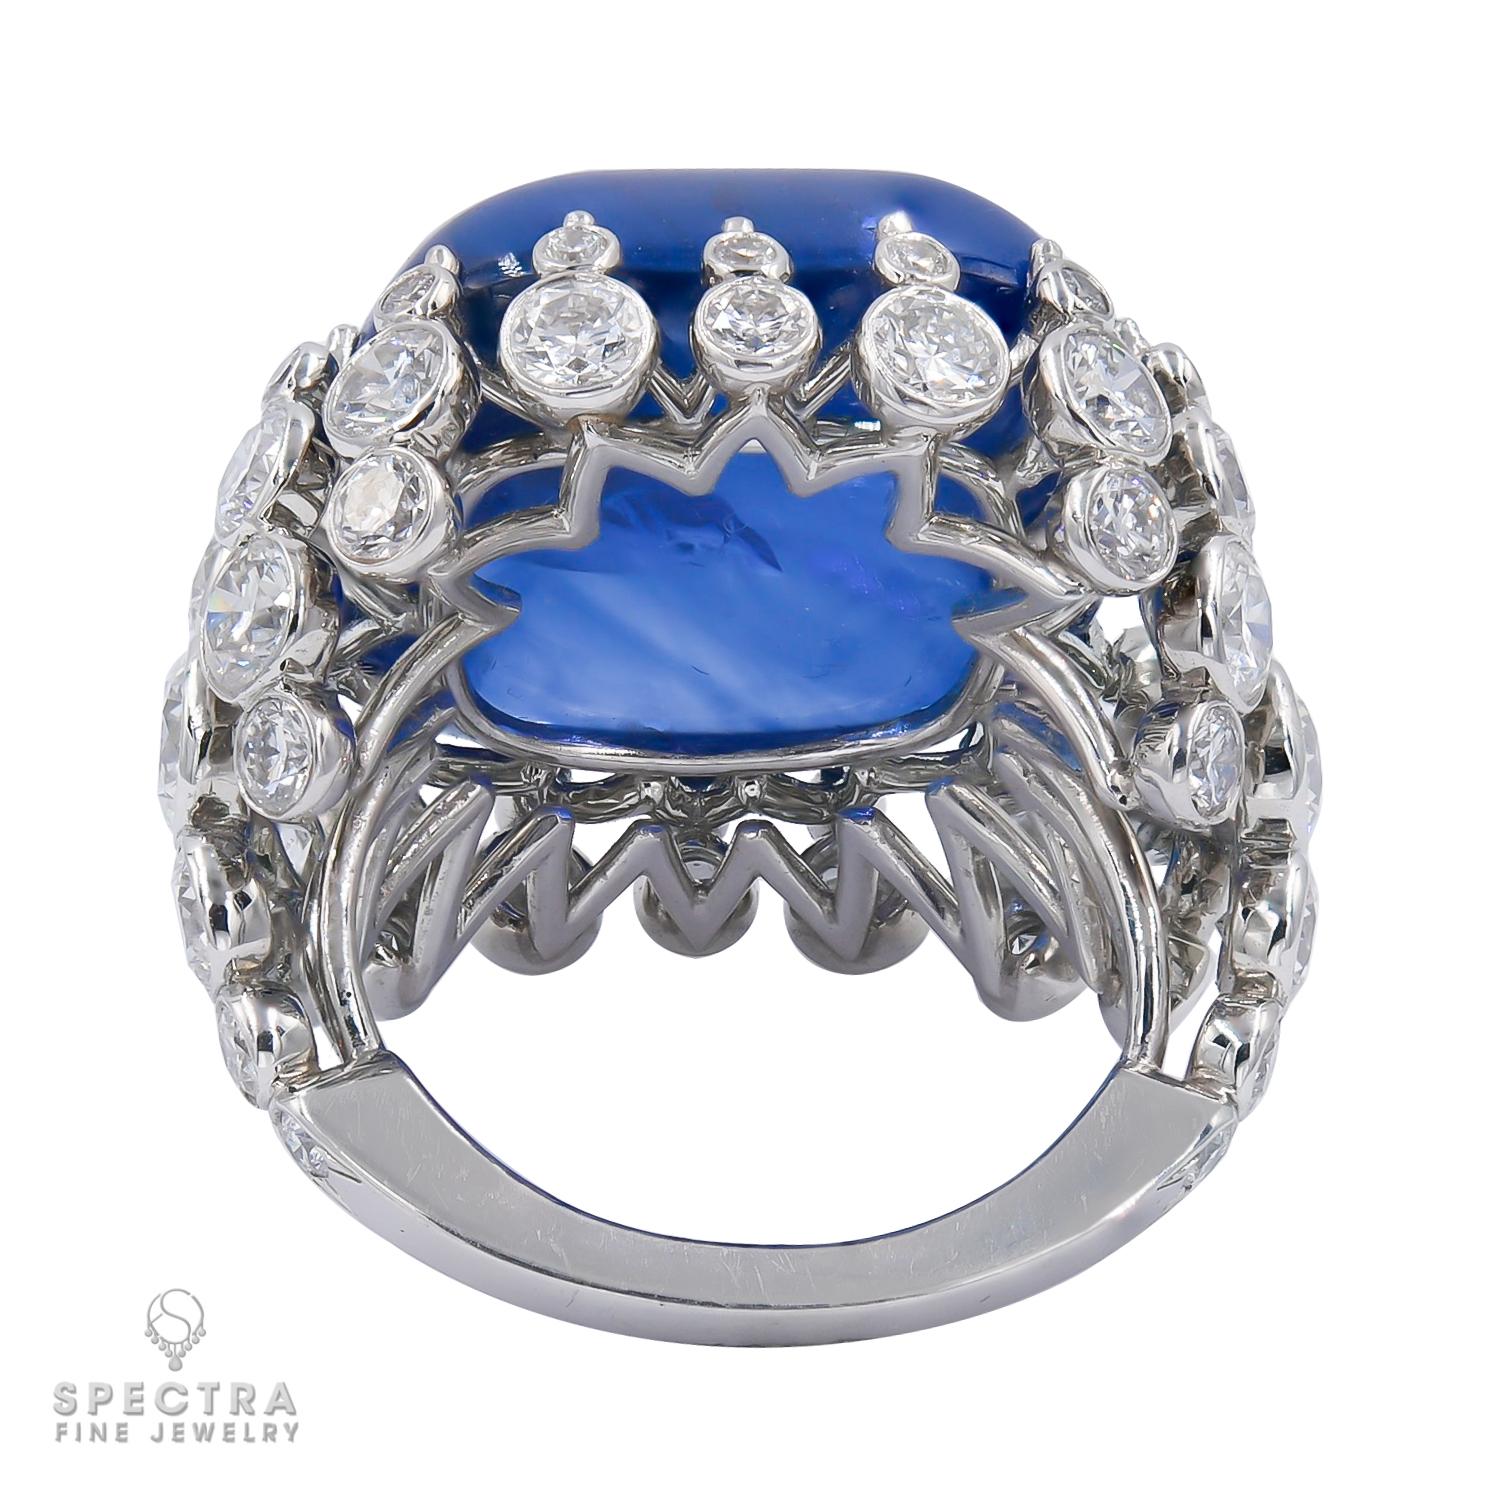 Spectra Fine Jewelry Certified 43.22 Carat Ceylon Sapphire Diamond Ring In New Condition For Sale In New York, NY